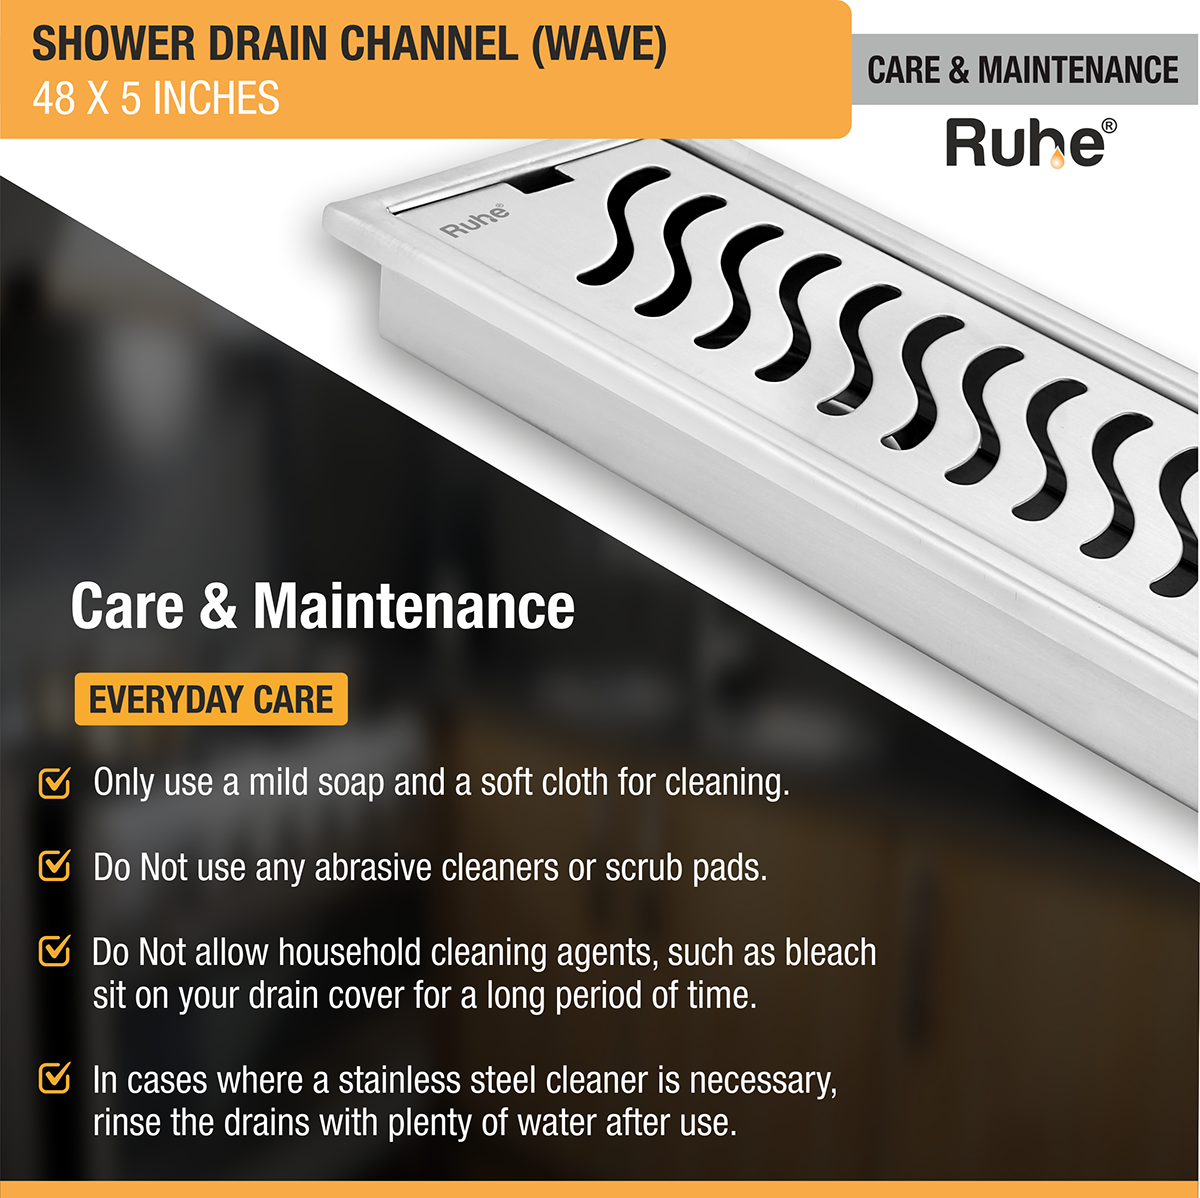 Wave Shower Drain Channel (48 X 5 Inches) with Cockroach Trap (304 Grade) care and maintenance